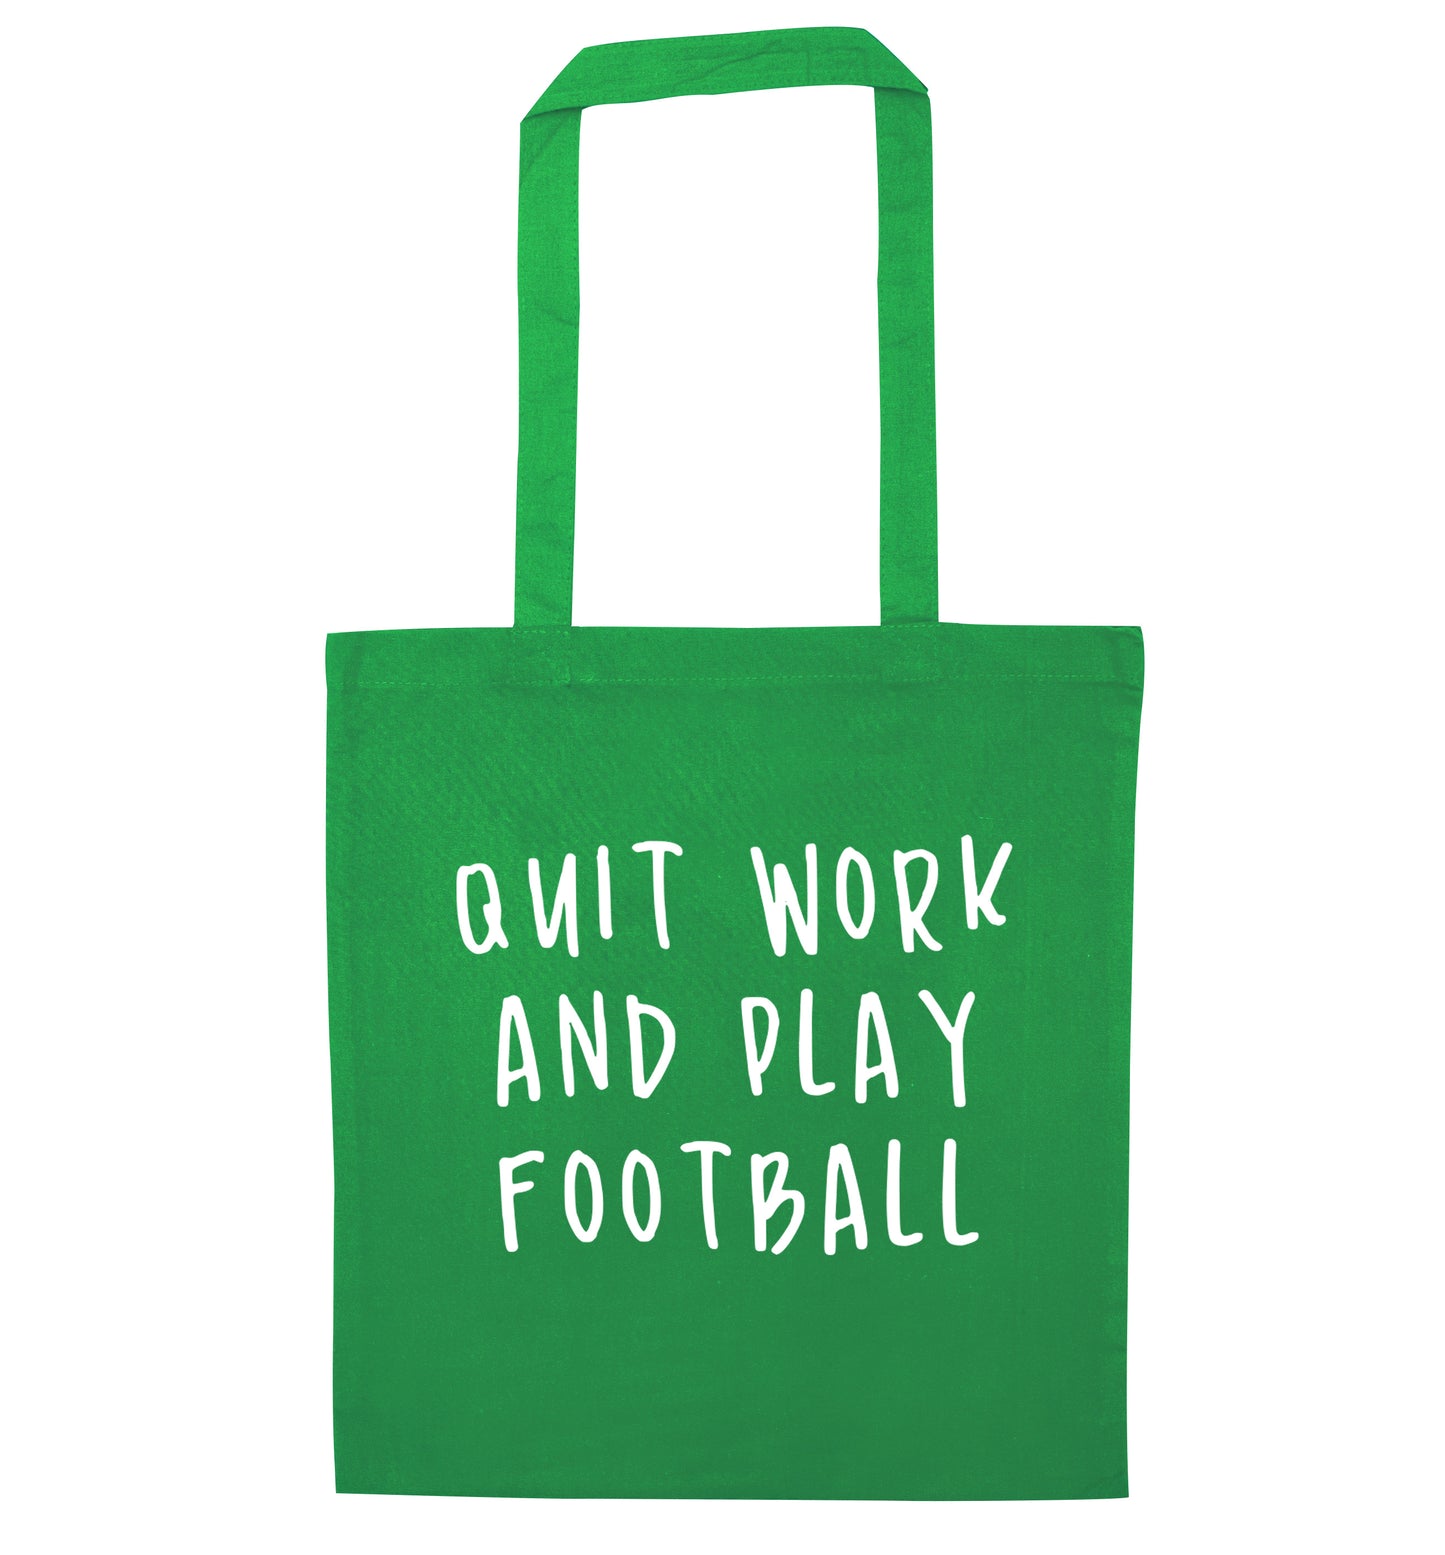 Quit work play football green tote bag